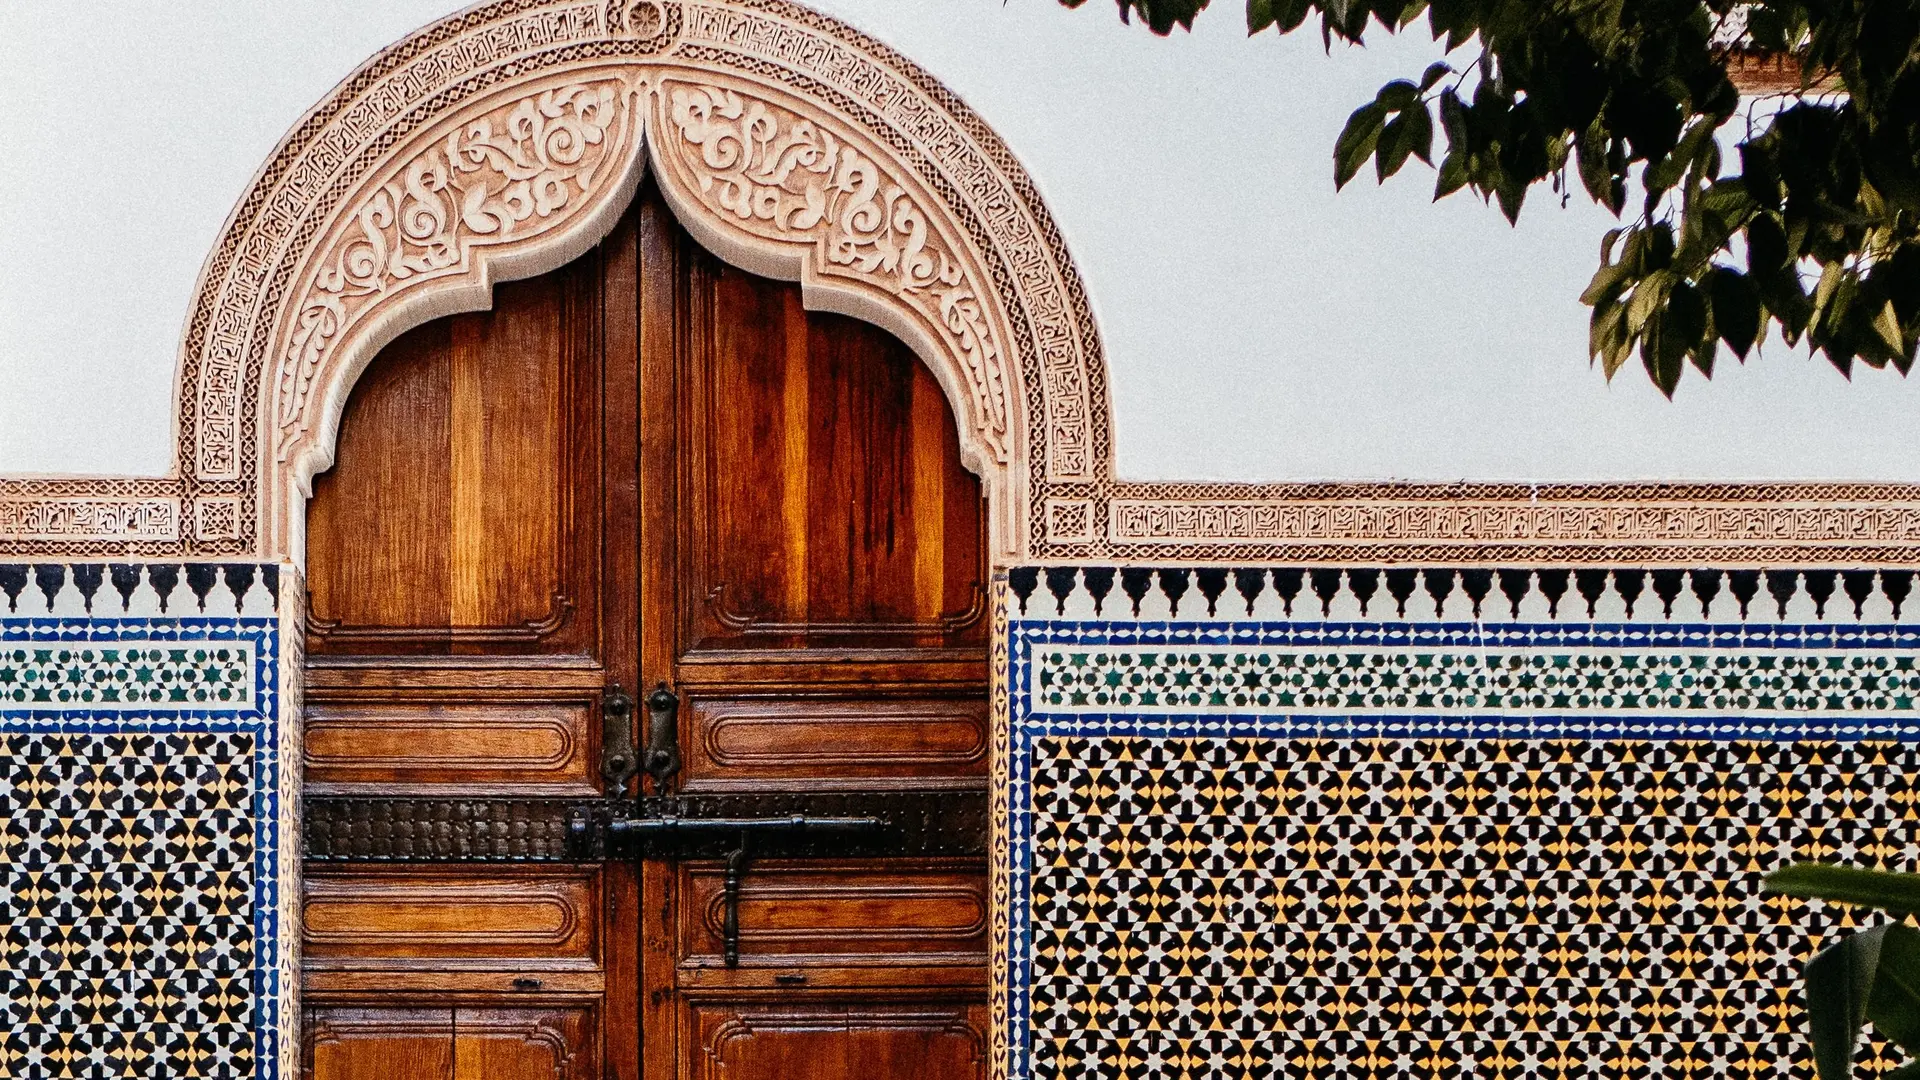 A large wooden door with polished clay tiles walls making a pattern of yellow, blue, white, black and pink.